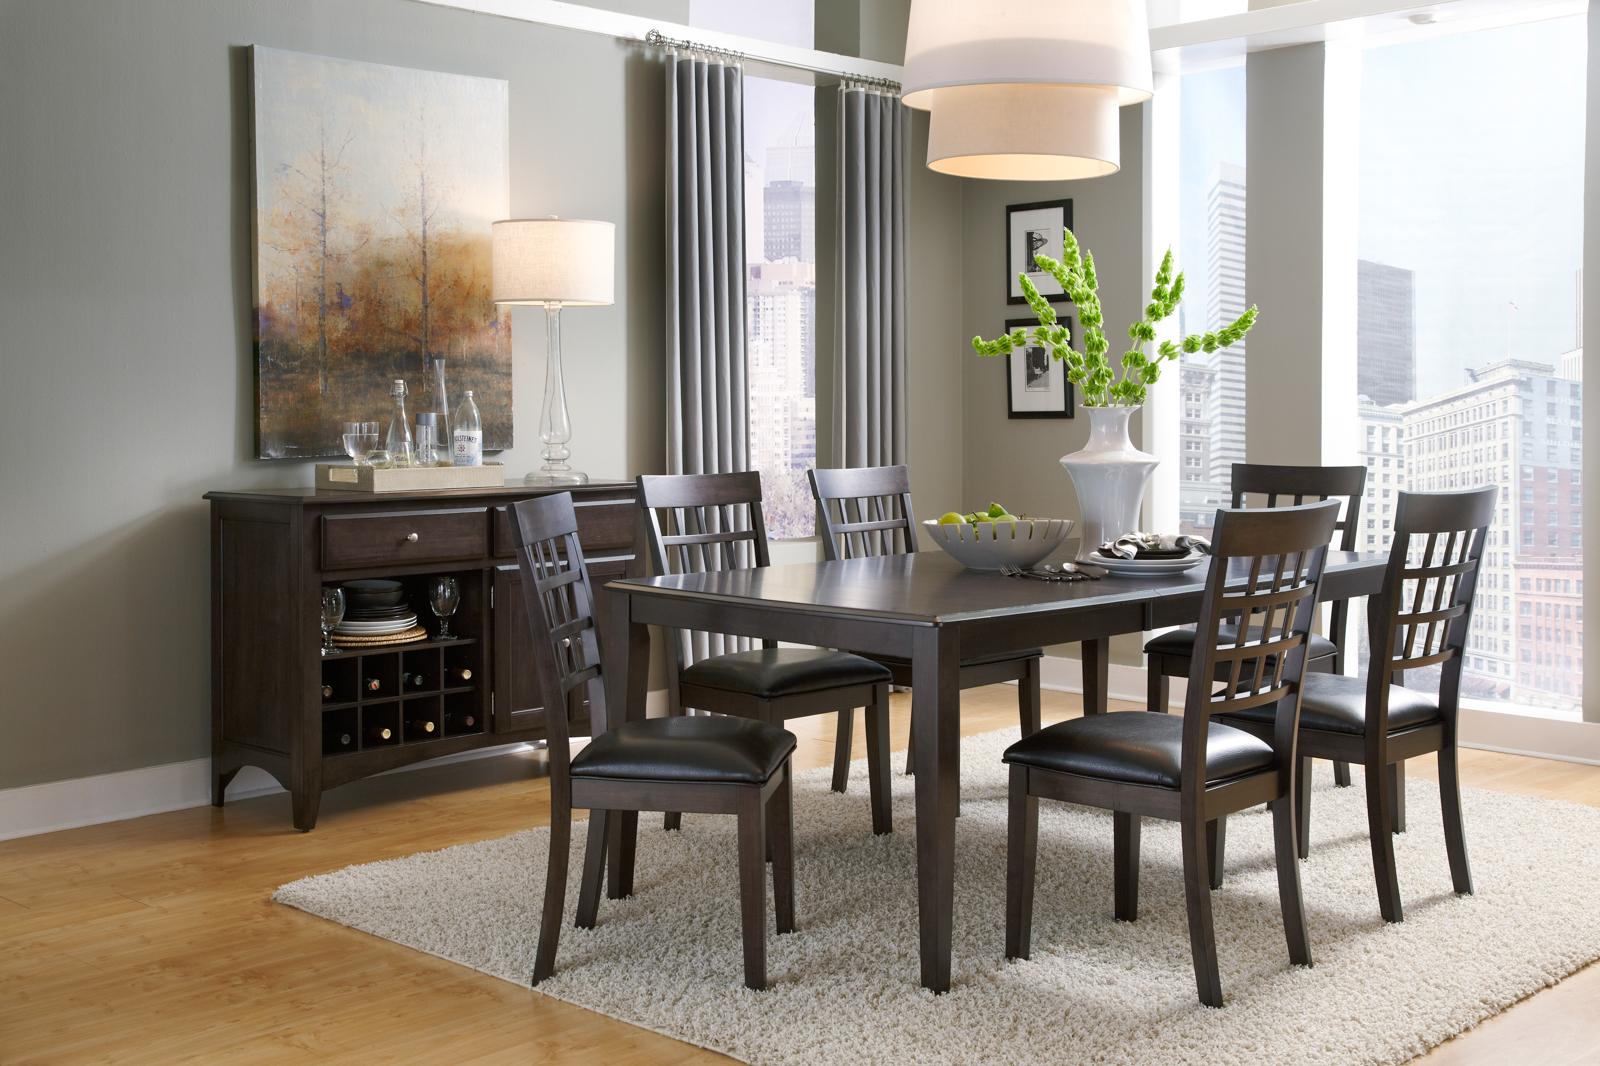 A America Bristol Point WG Dining Table Set